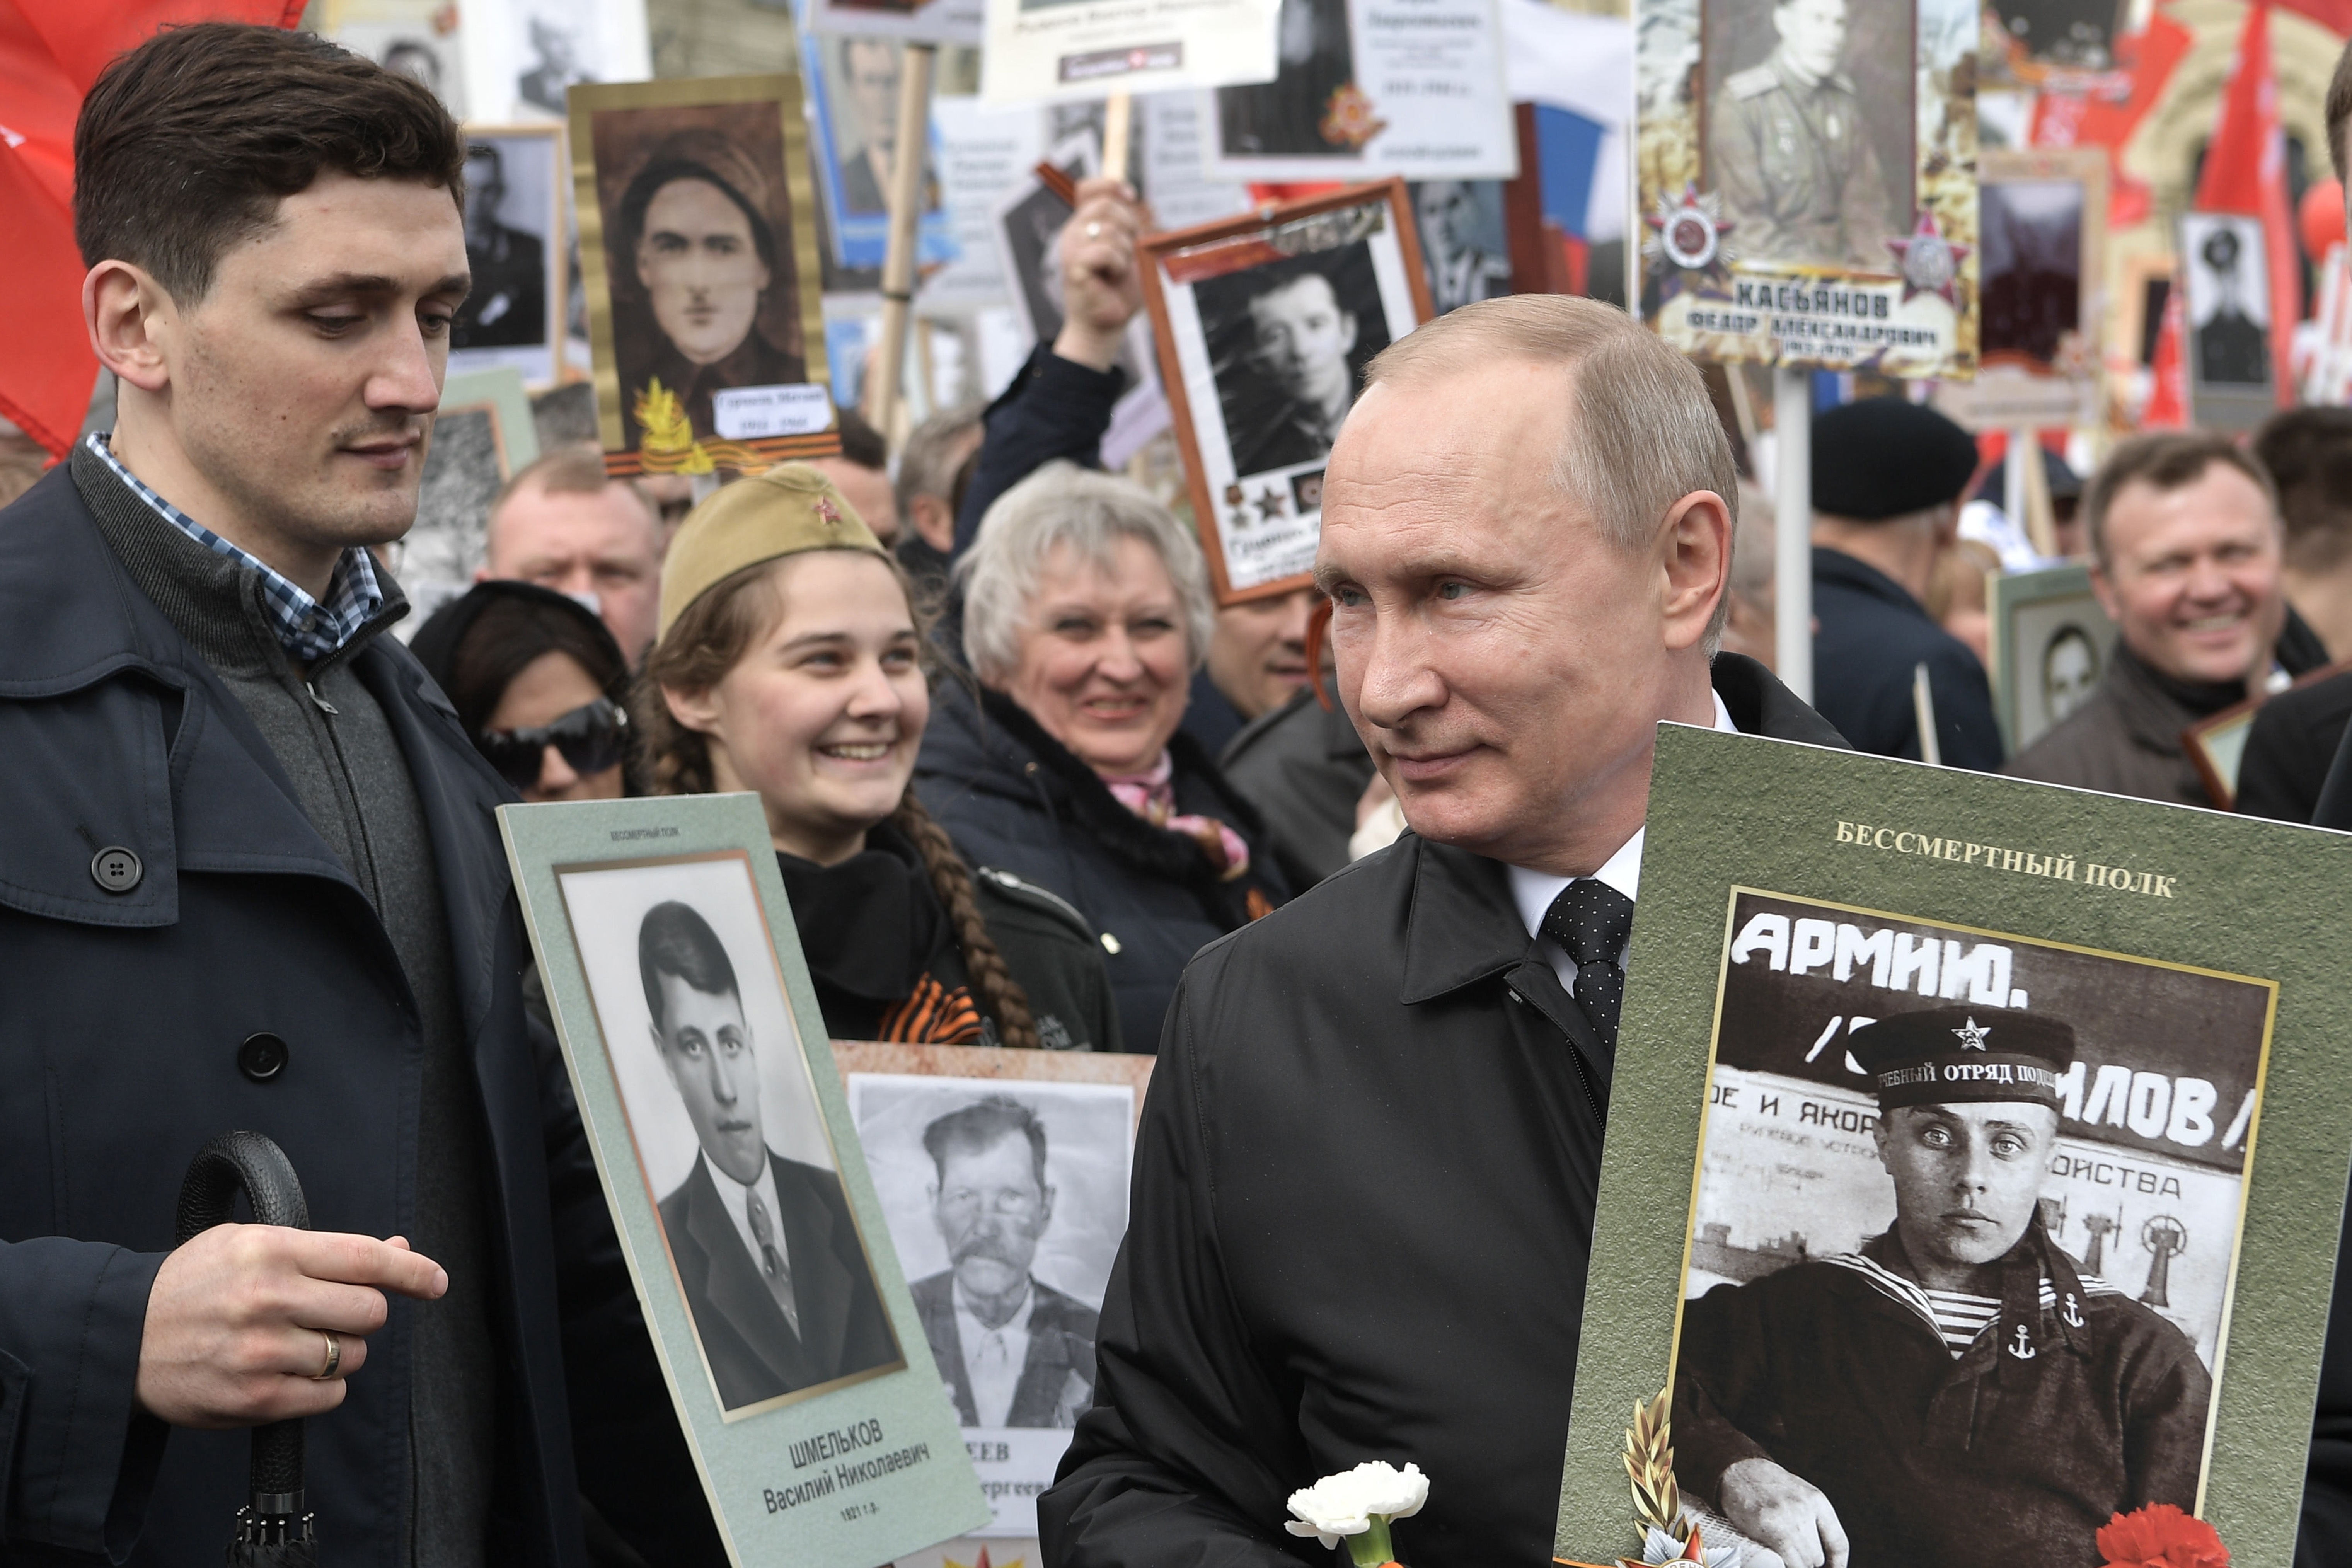 Russian President Vladimir Putin, right, holds a portrait of his father Vladimir Spiridonovich Putin as he walks among other people carrying portraits of relatives who fought in World War II, with Russian and Soviet flags, during the Immortal Regiment march at the Red Square in Moscow, Russia, on Tuesday, May 9, 2017, celebrating 72 years since the end of WWII and the defeat of Nazi Germany. (Alexei Nikolsky, Sputnik, Kremlin Pool Photo via AP)